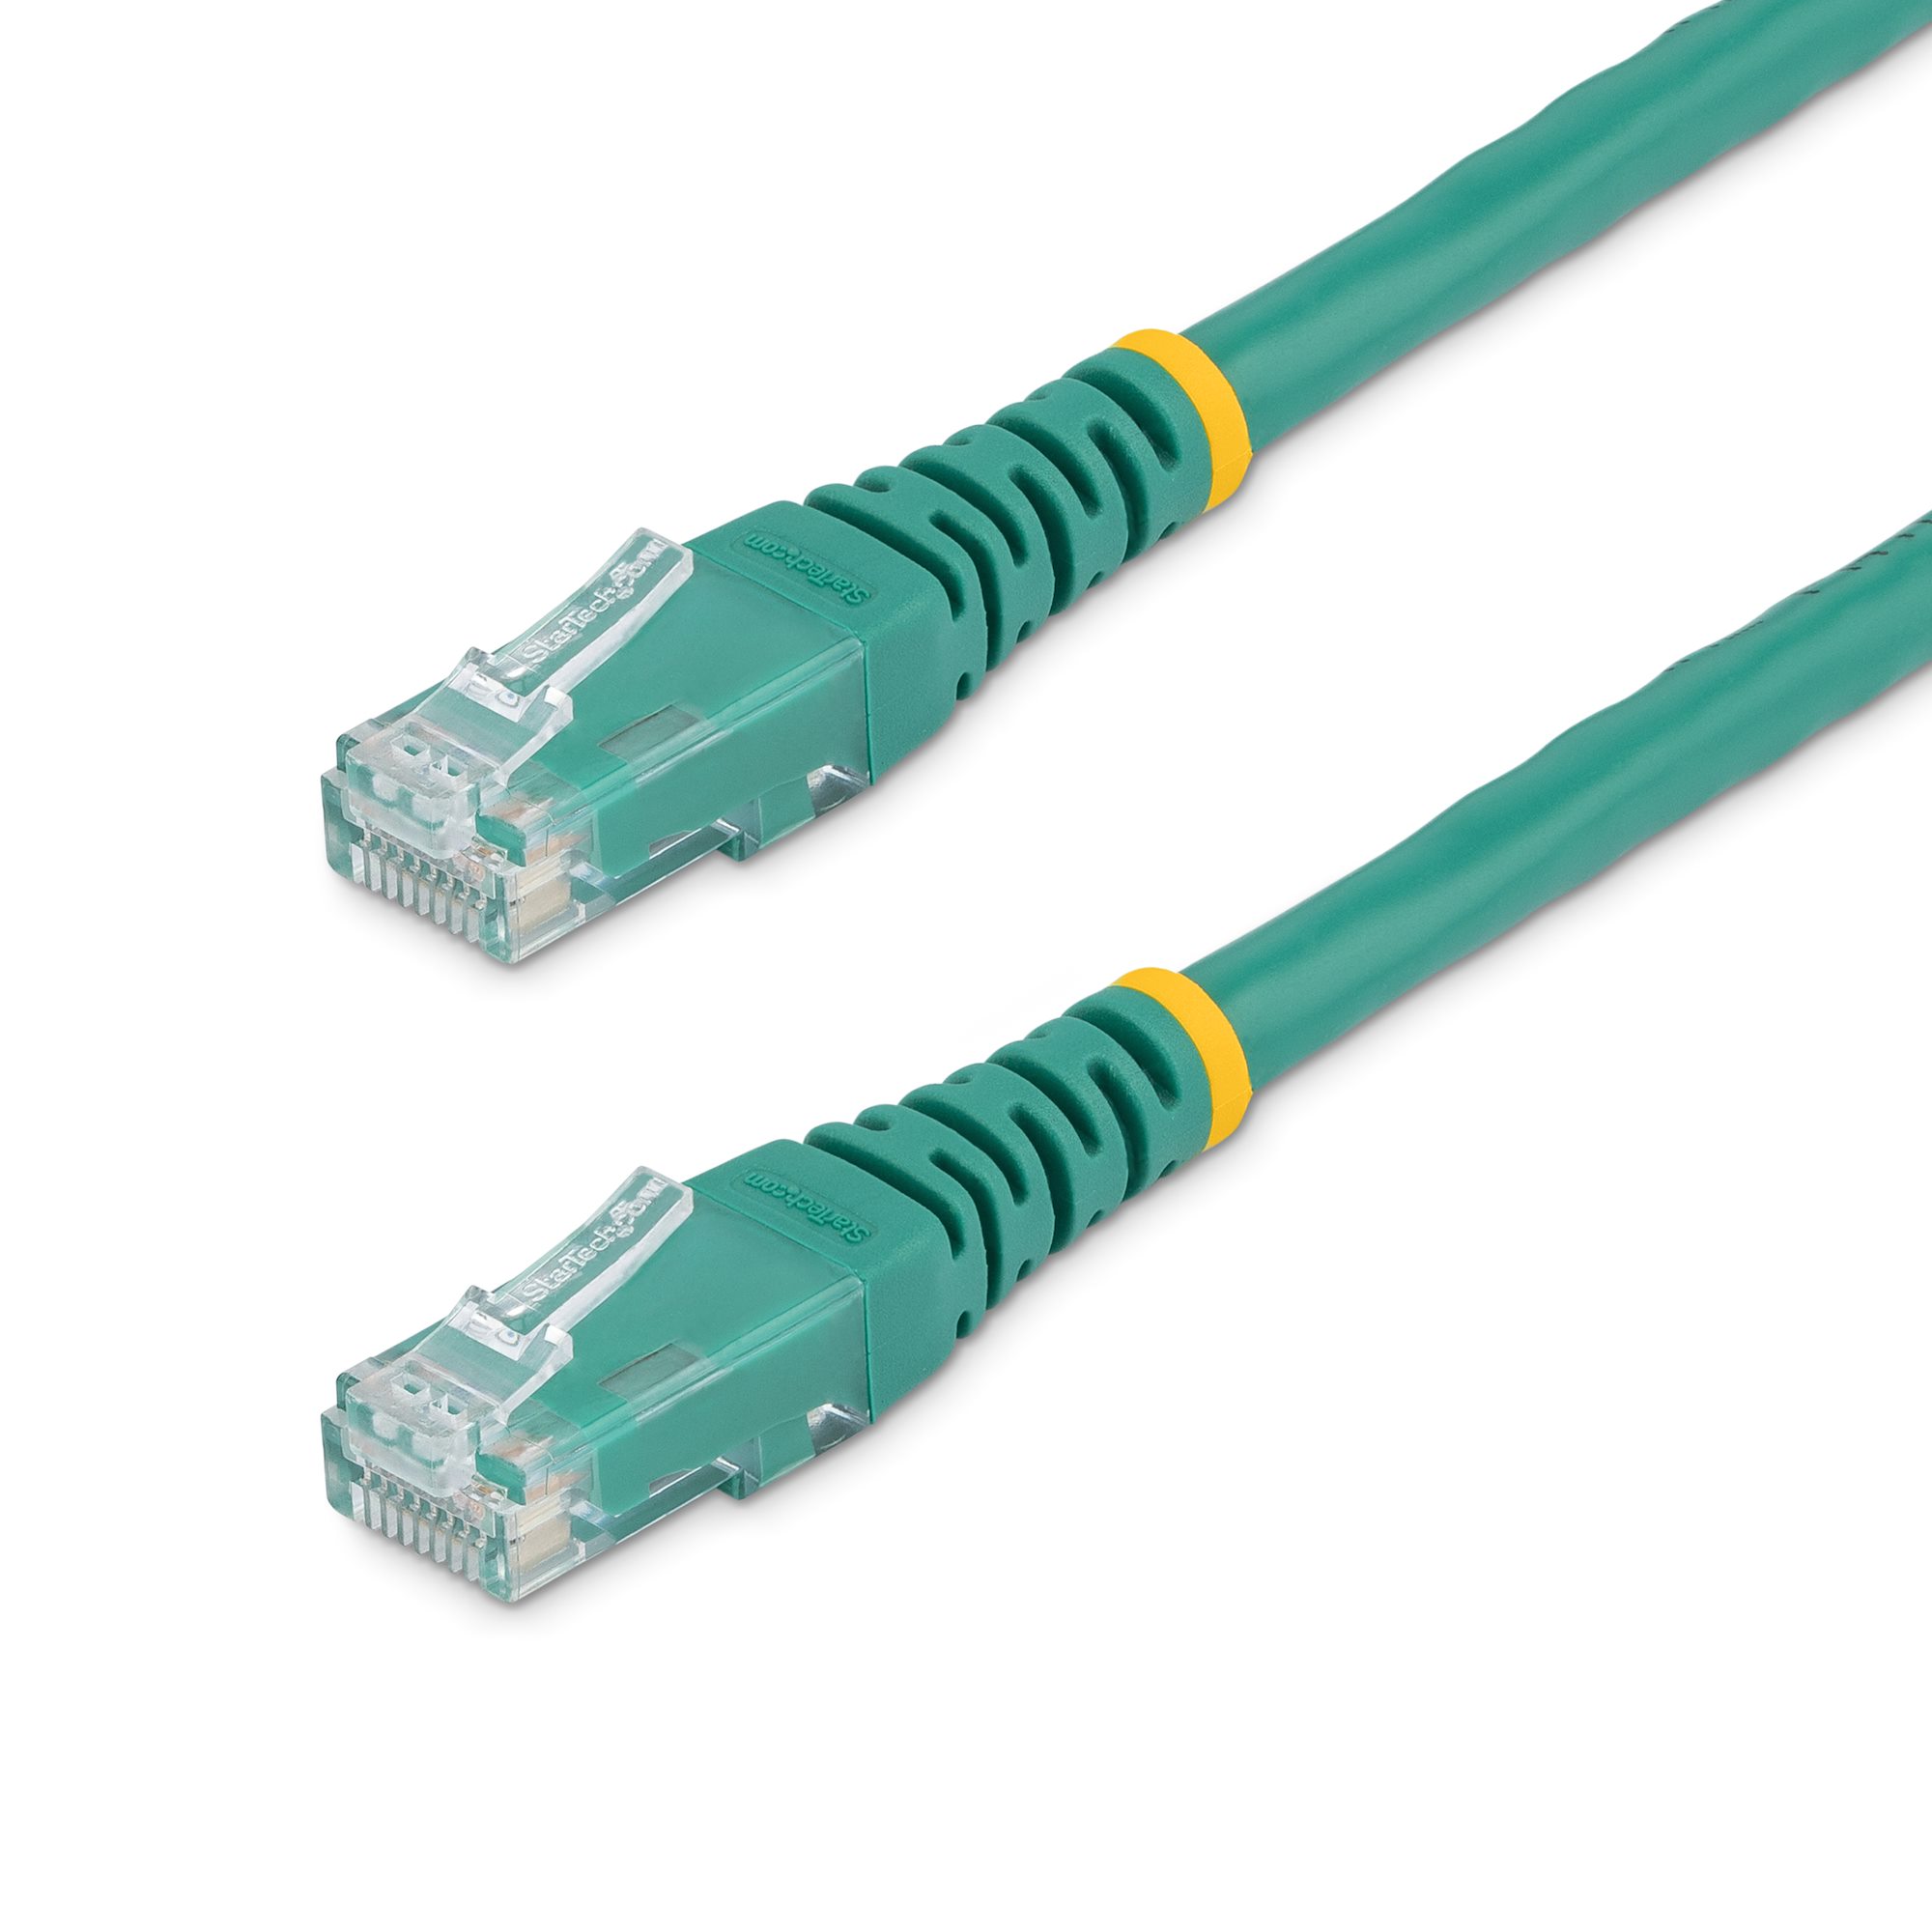 Cat6 Ethernet Cable - 20 ft - Blue - Patch Cable - Molded Cat6 Cable -  Network Cable - Ethernet Cord - Cat 6 Cable - 20ft